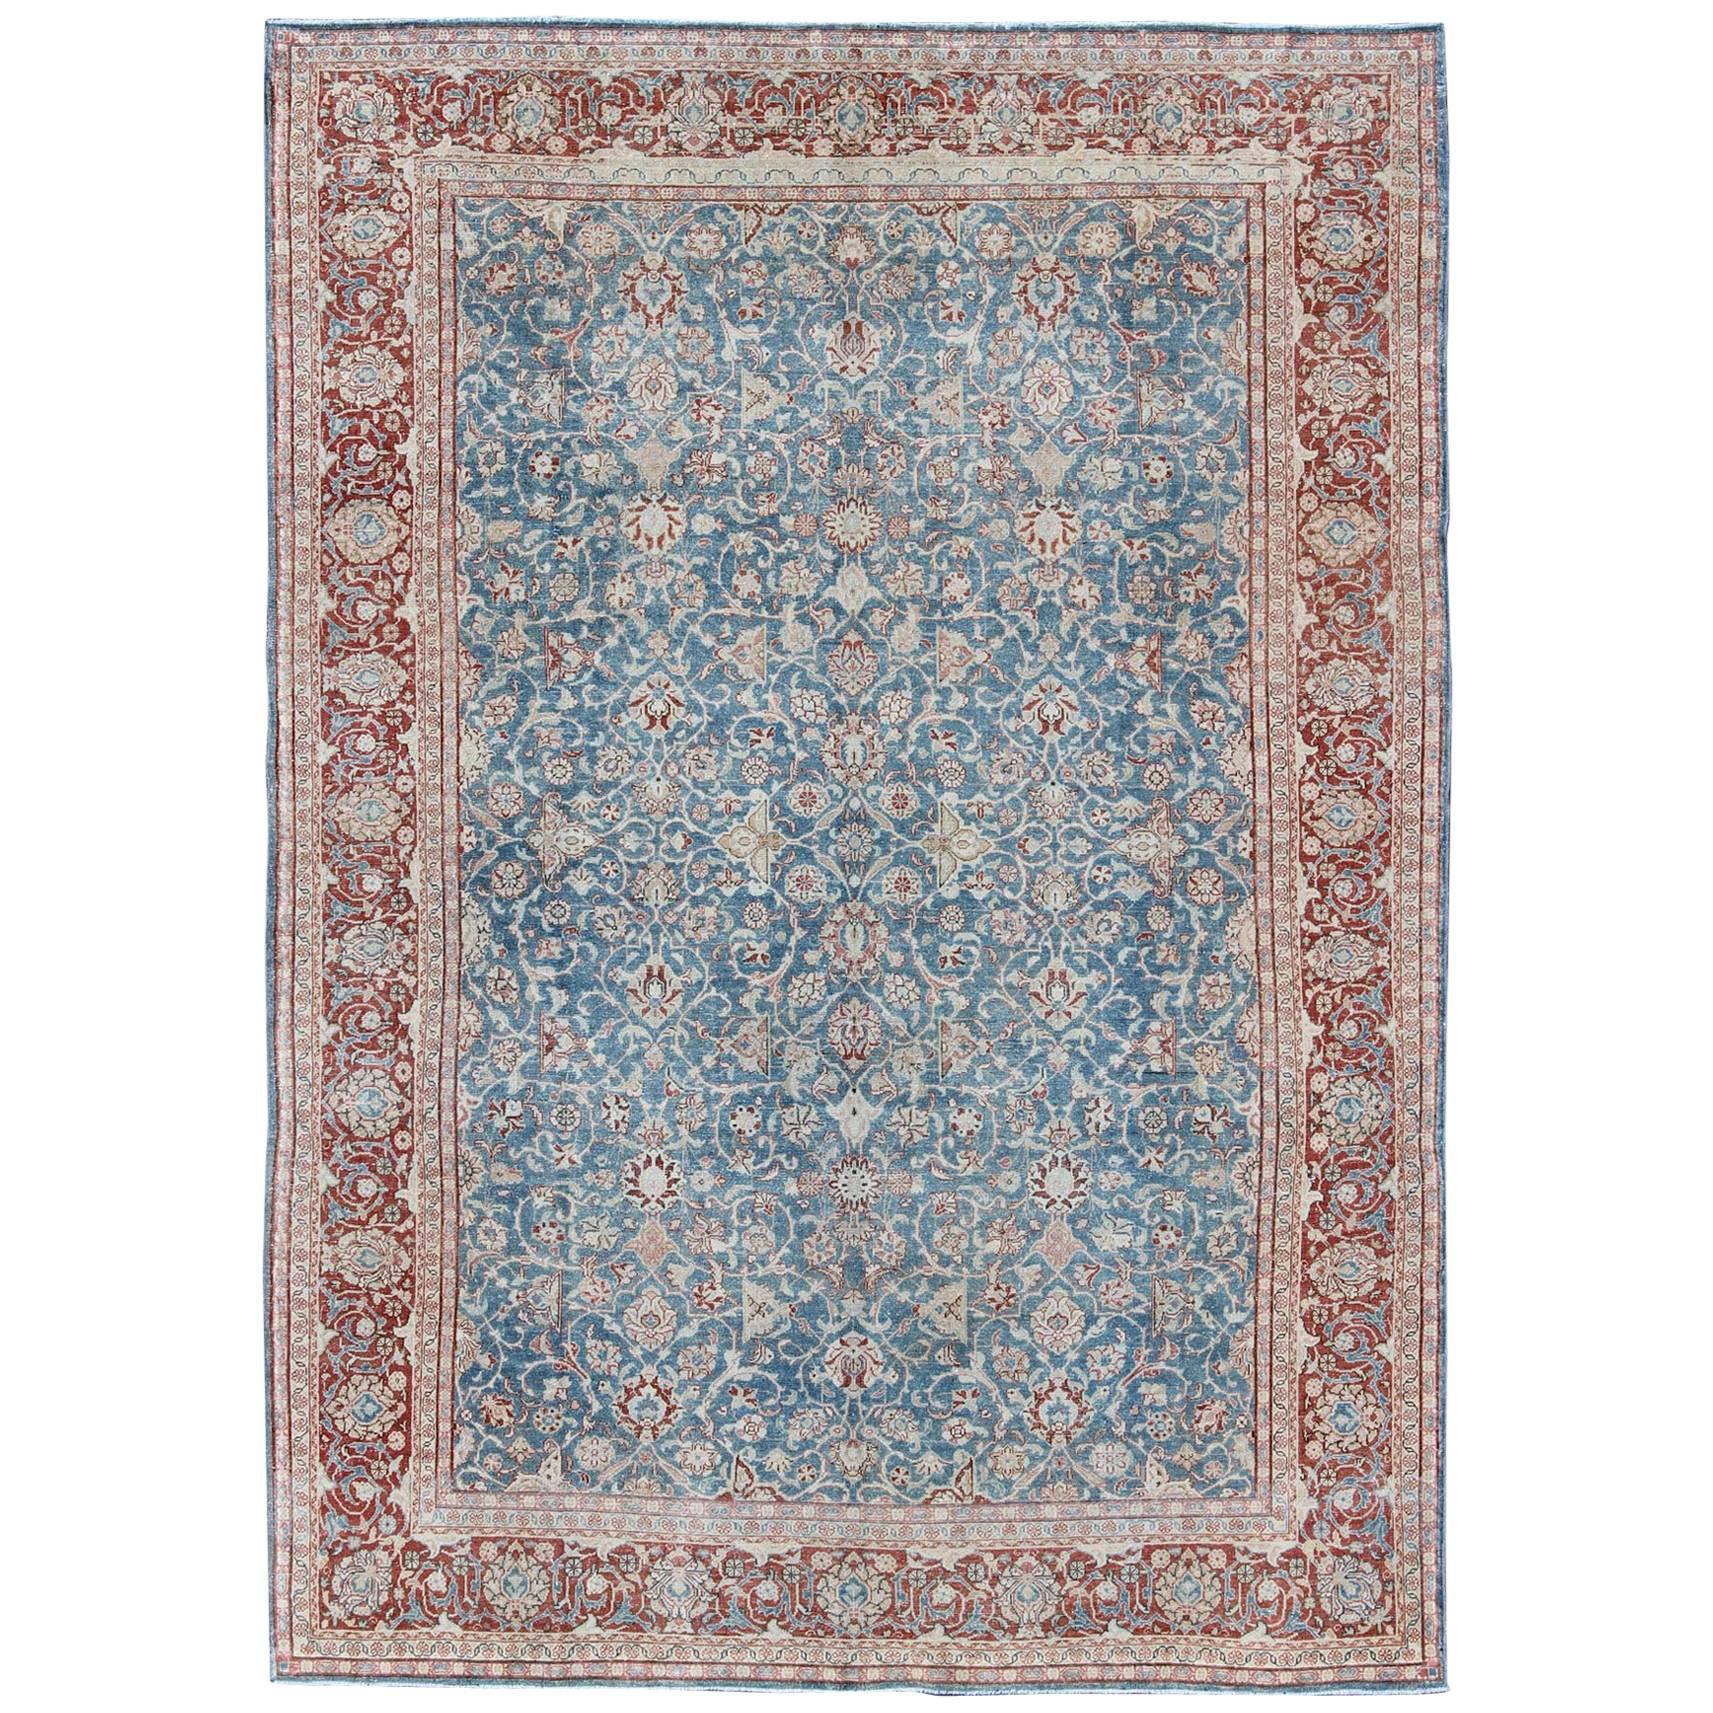 Blue and Red Antique Persian Malayer Rug with All-Over Design and Ornate Borders